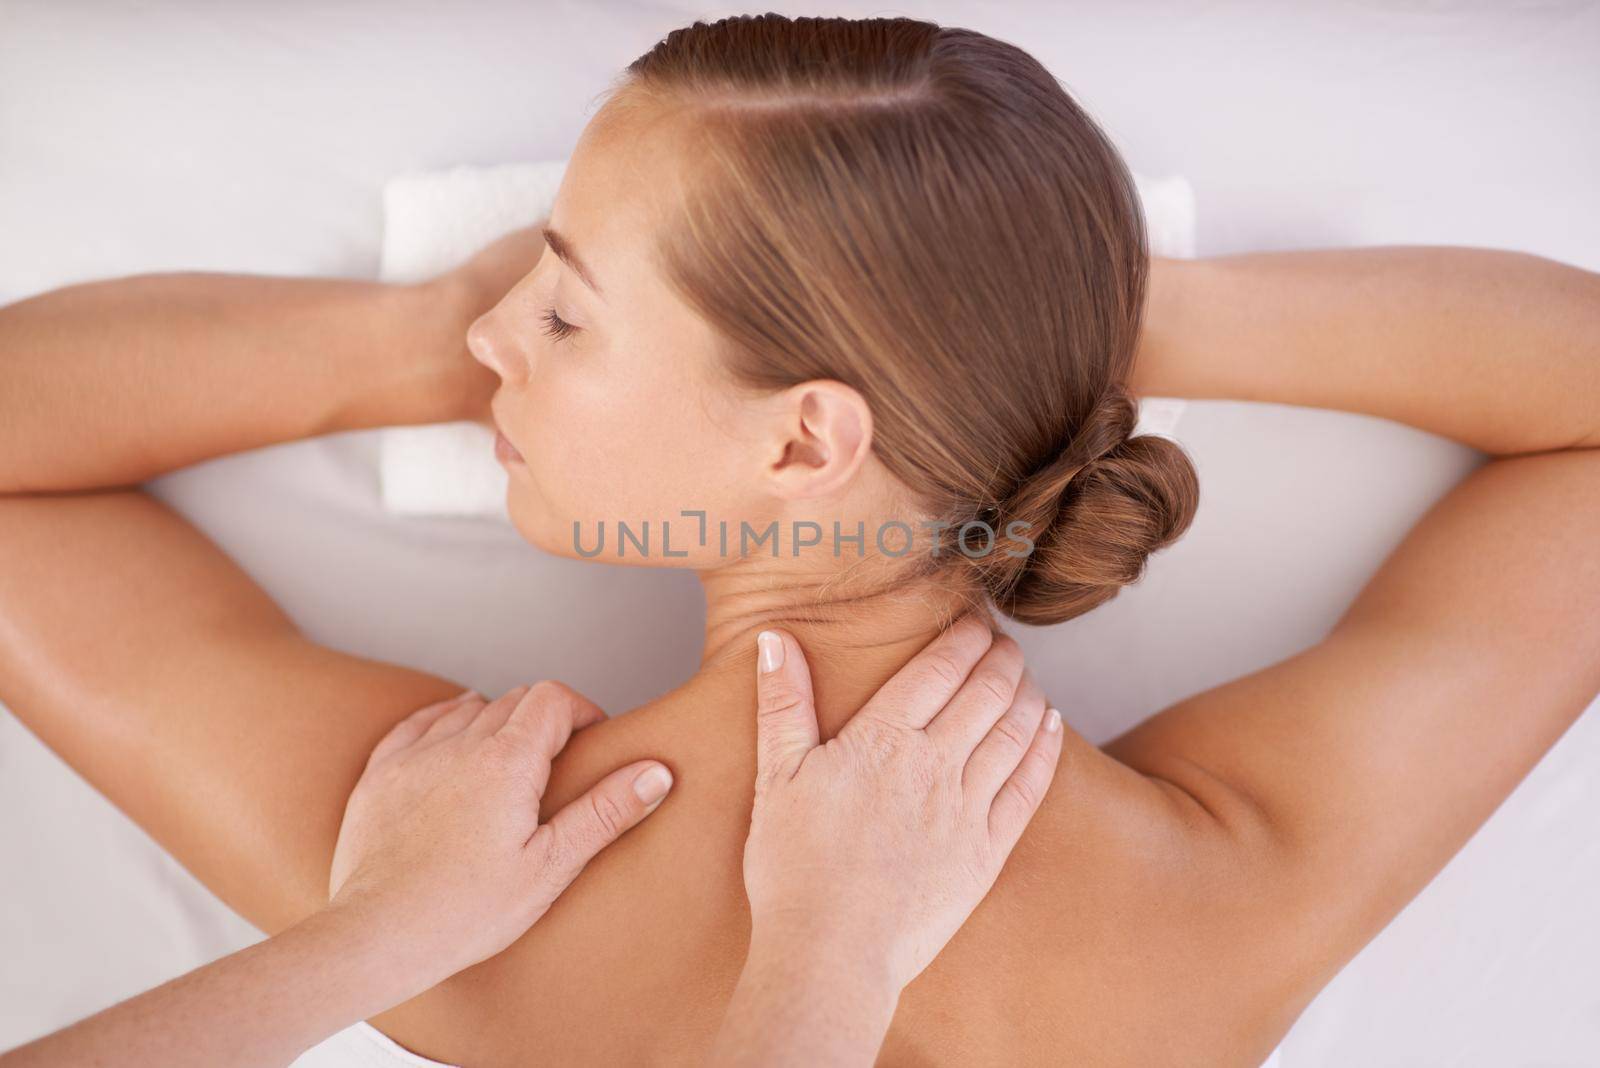 A young woman on a massage table in a spa.